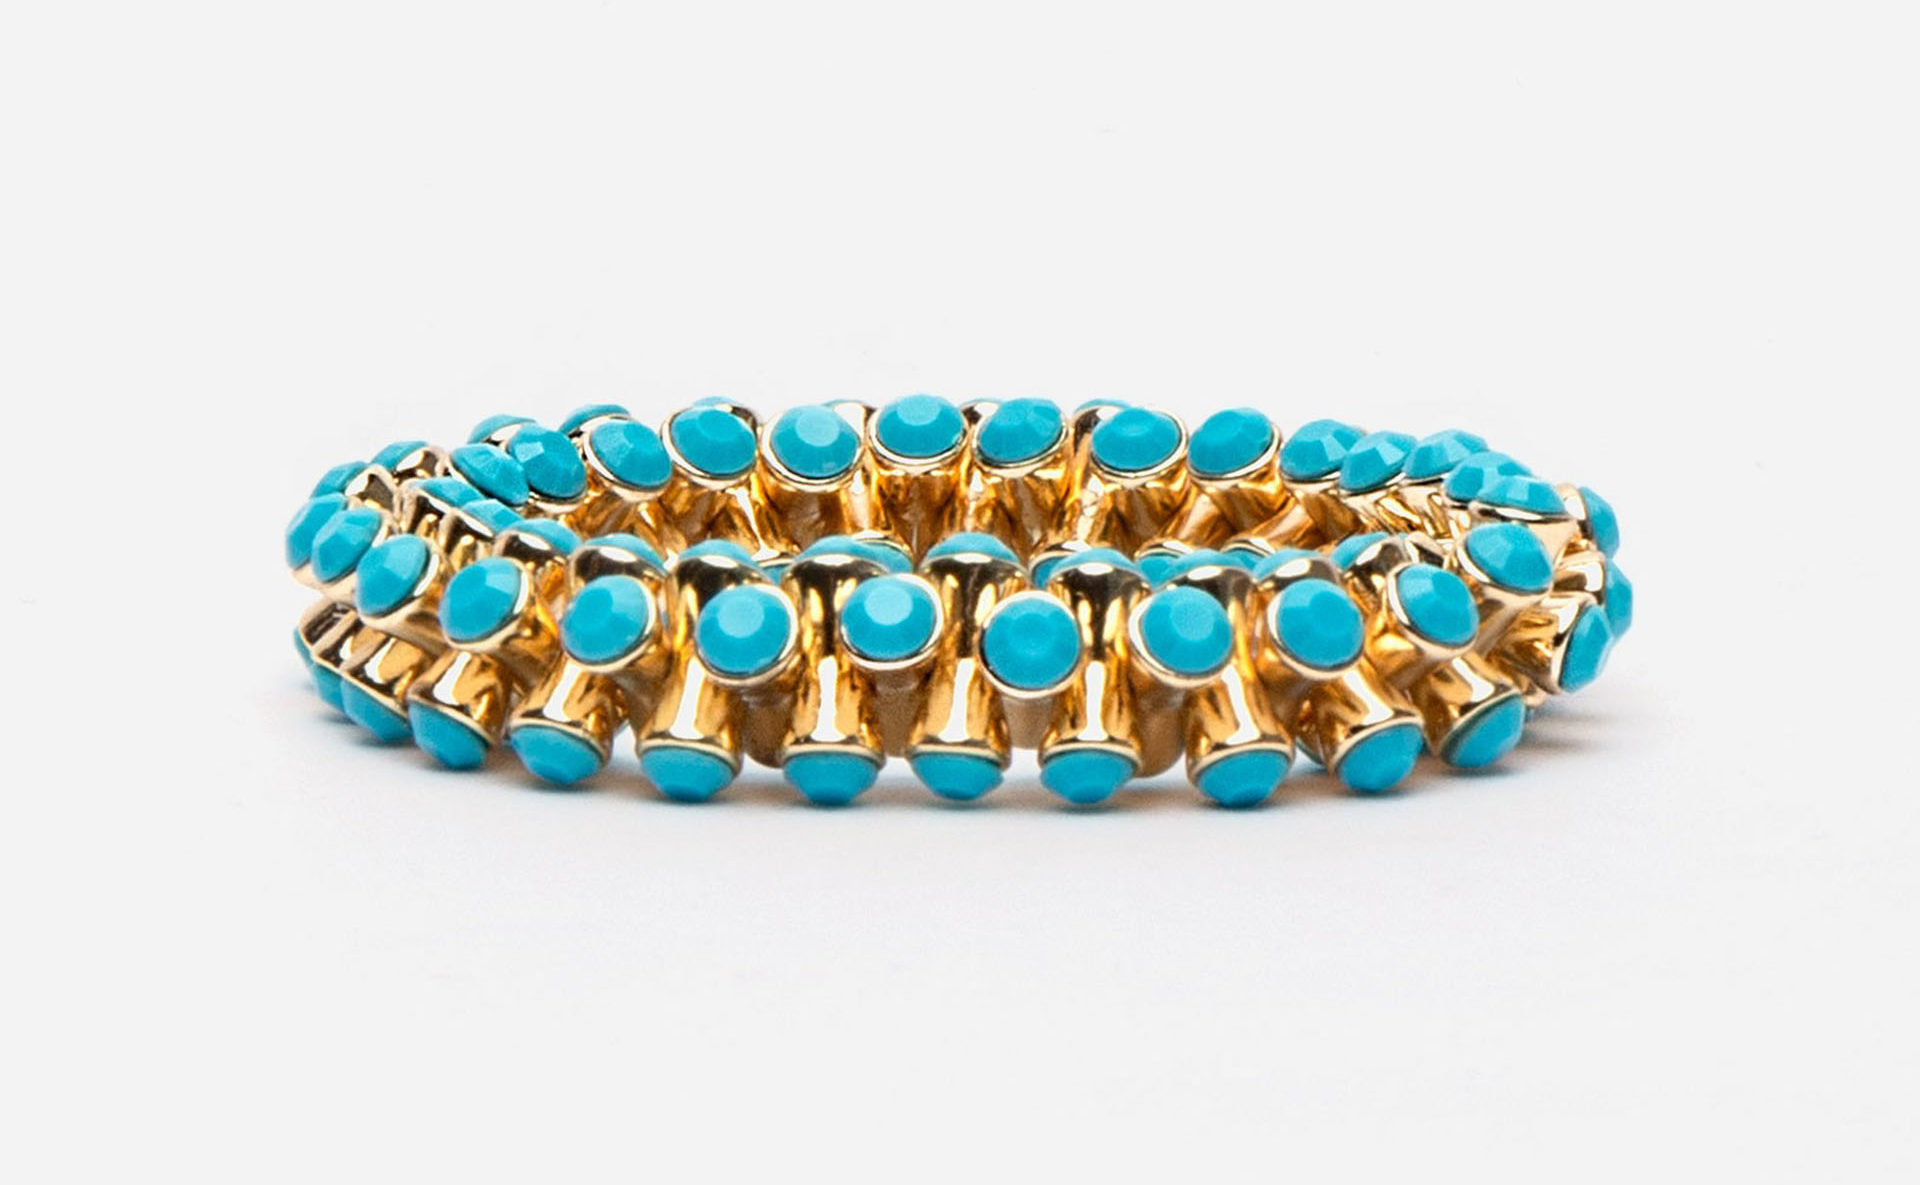 Stretch Bracelet in Turquoise, $112